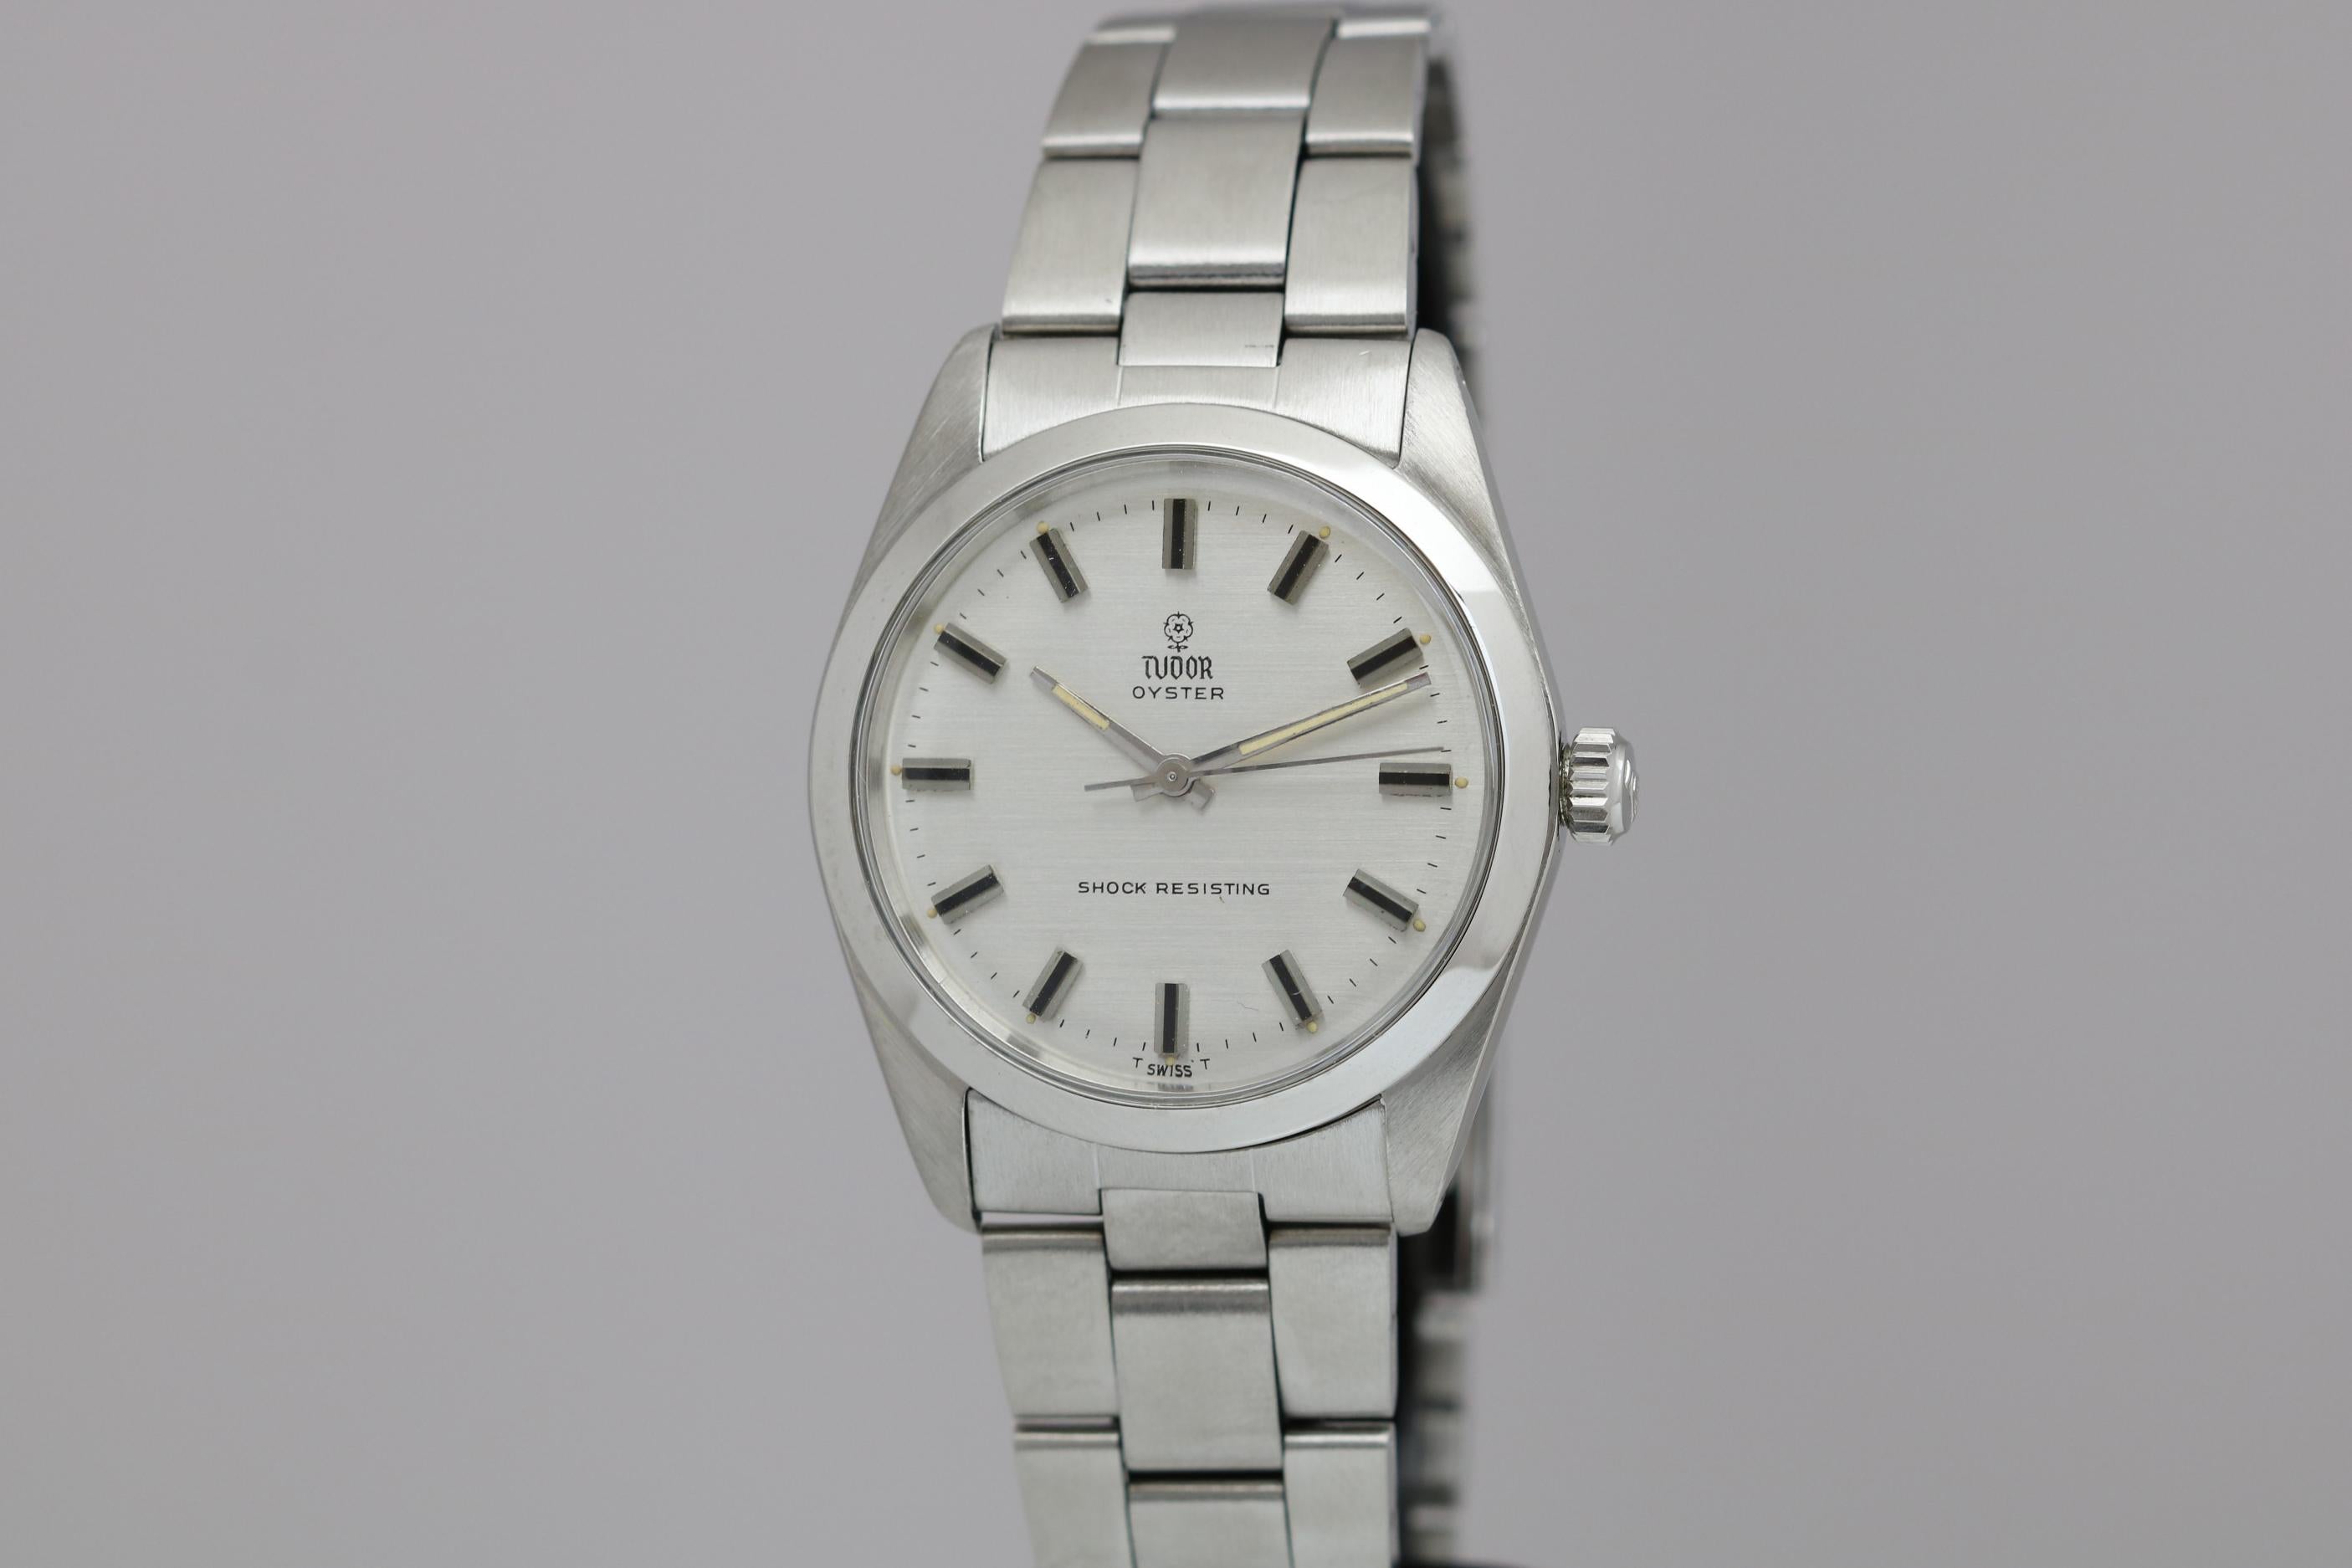 Tudor Shock Resisting Ref 7991/0 in stainless steel with silver dial and Tudor Rose logo. Comes on a Rolex oyster foldover link bracelet circa 1965